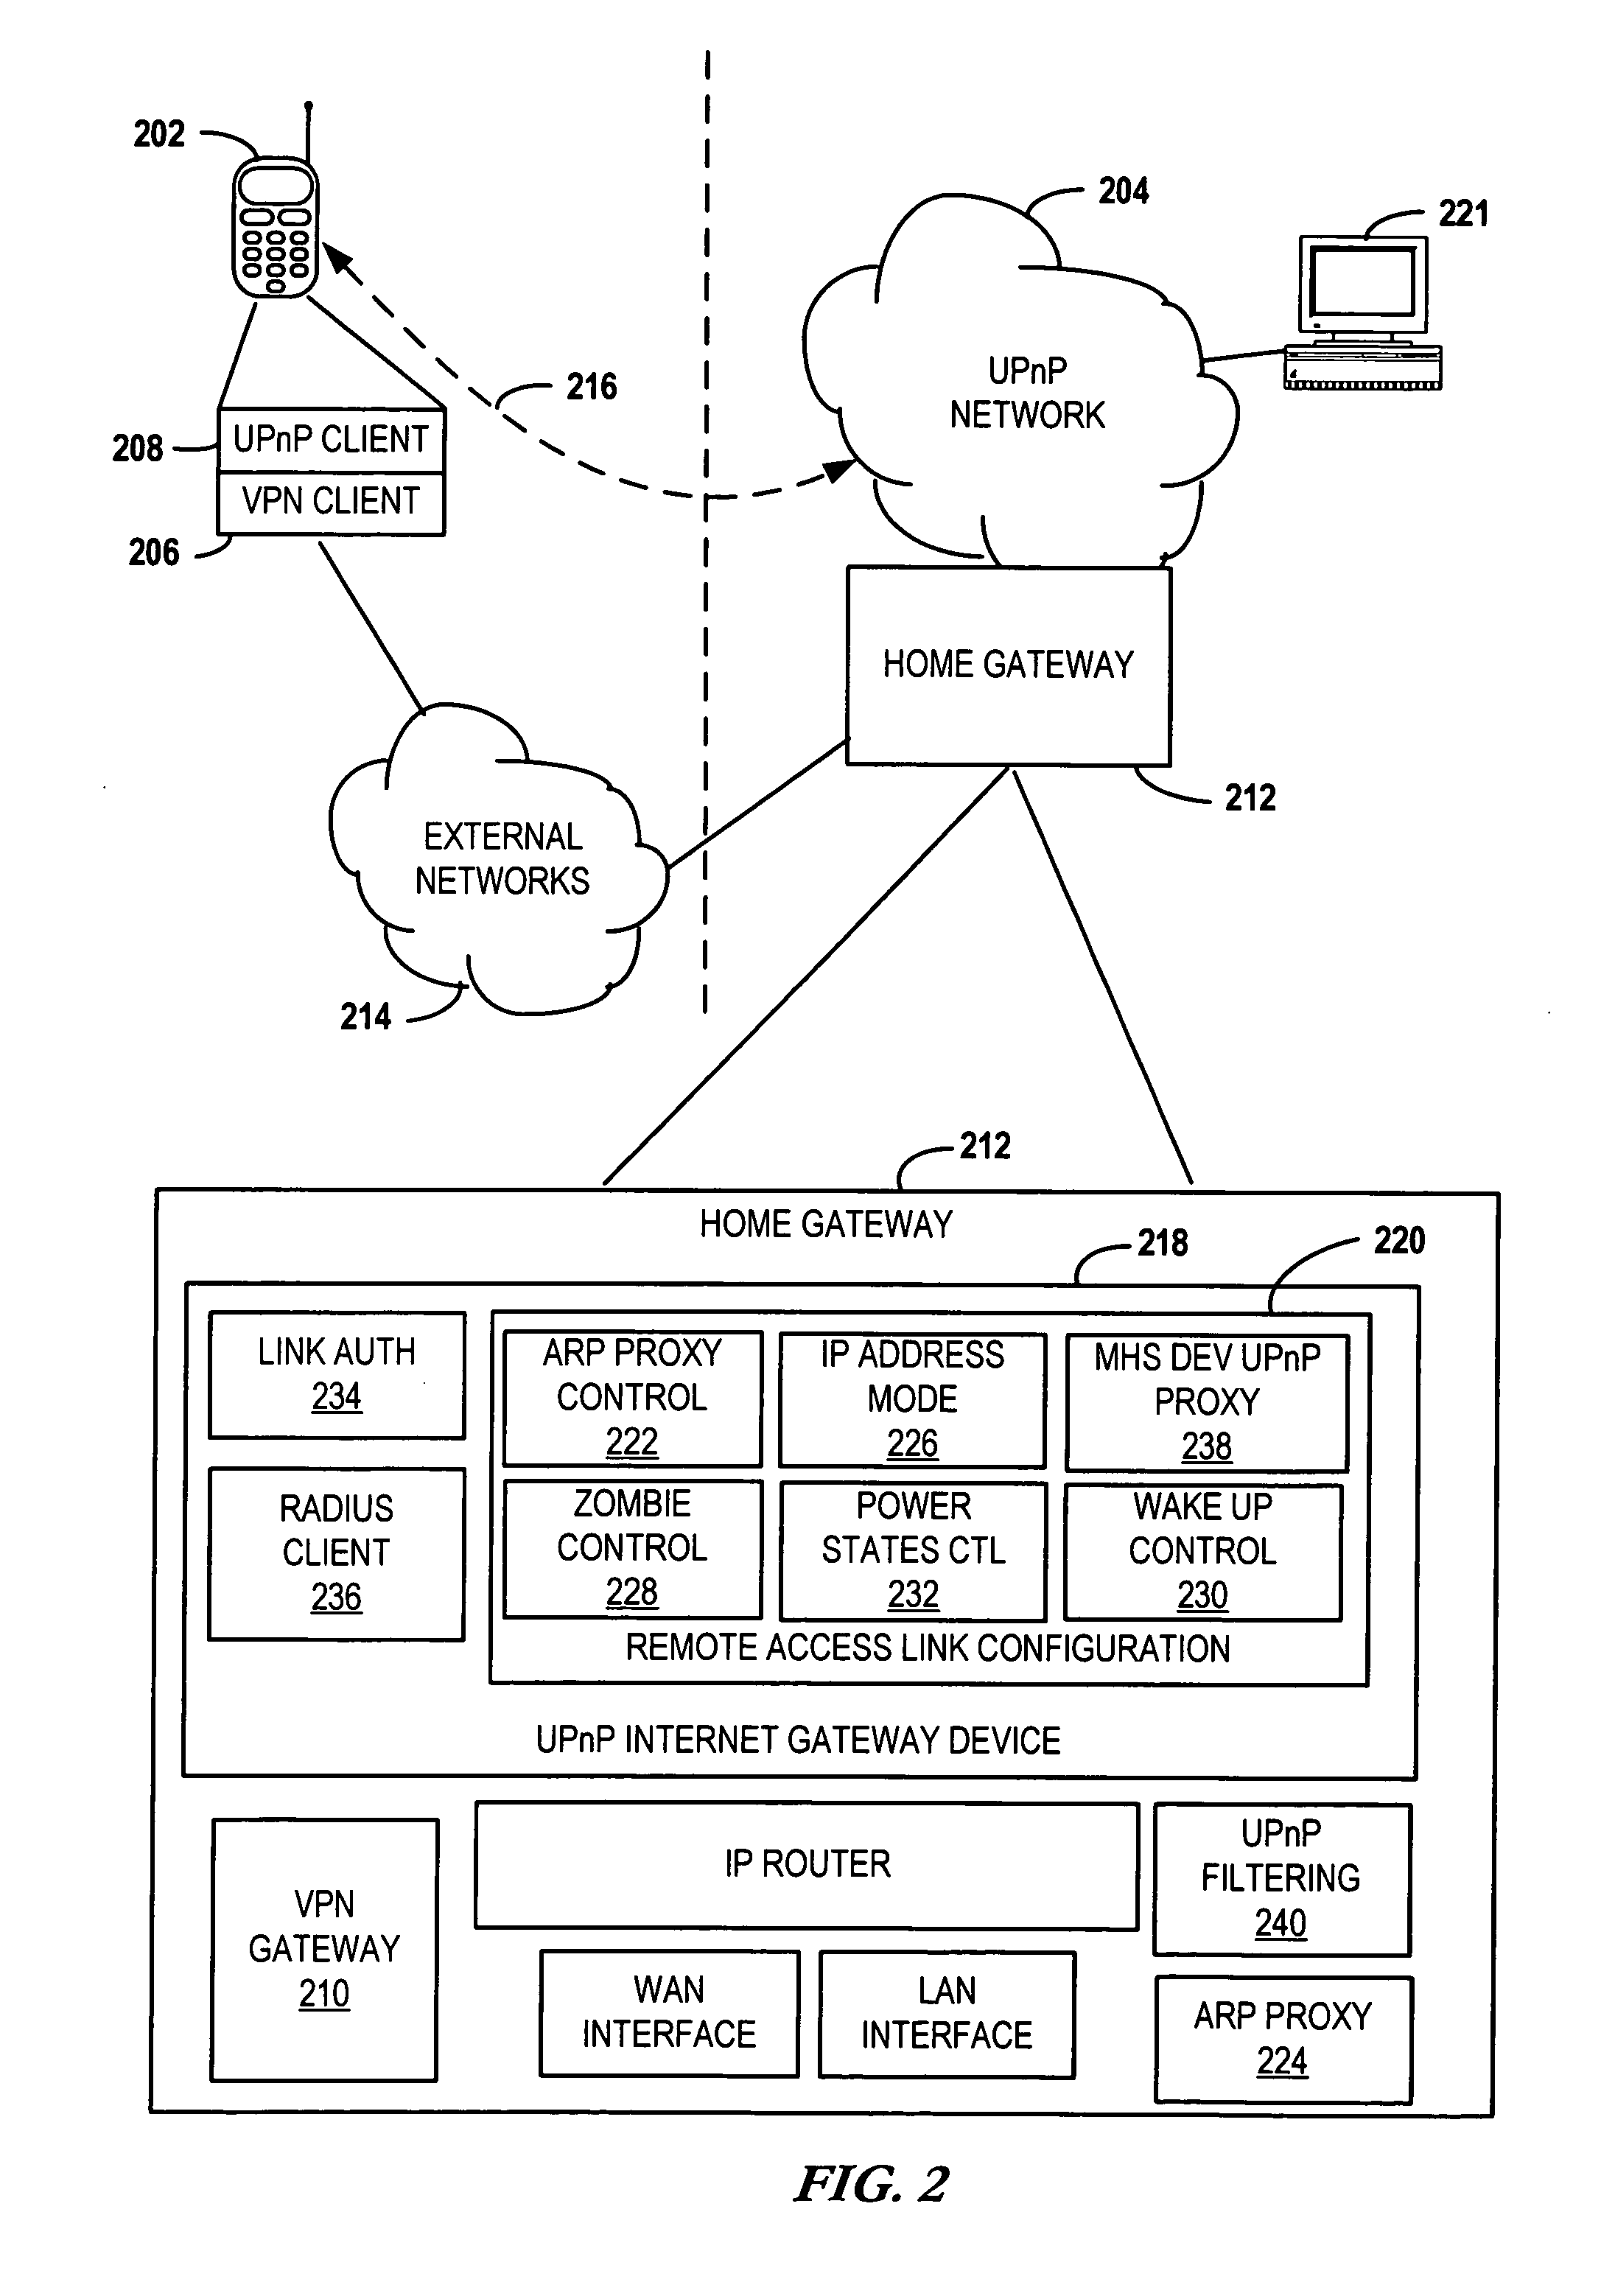 Local network proxy for a remotely connected mobile device operating in reduced power mode